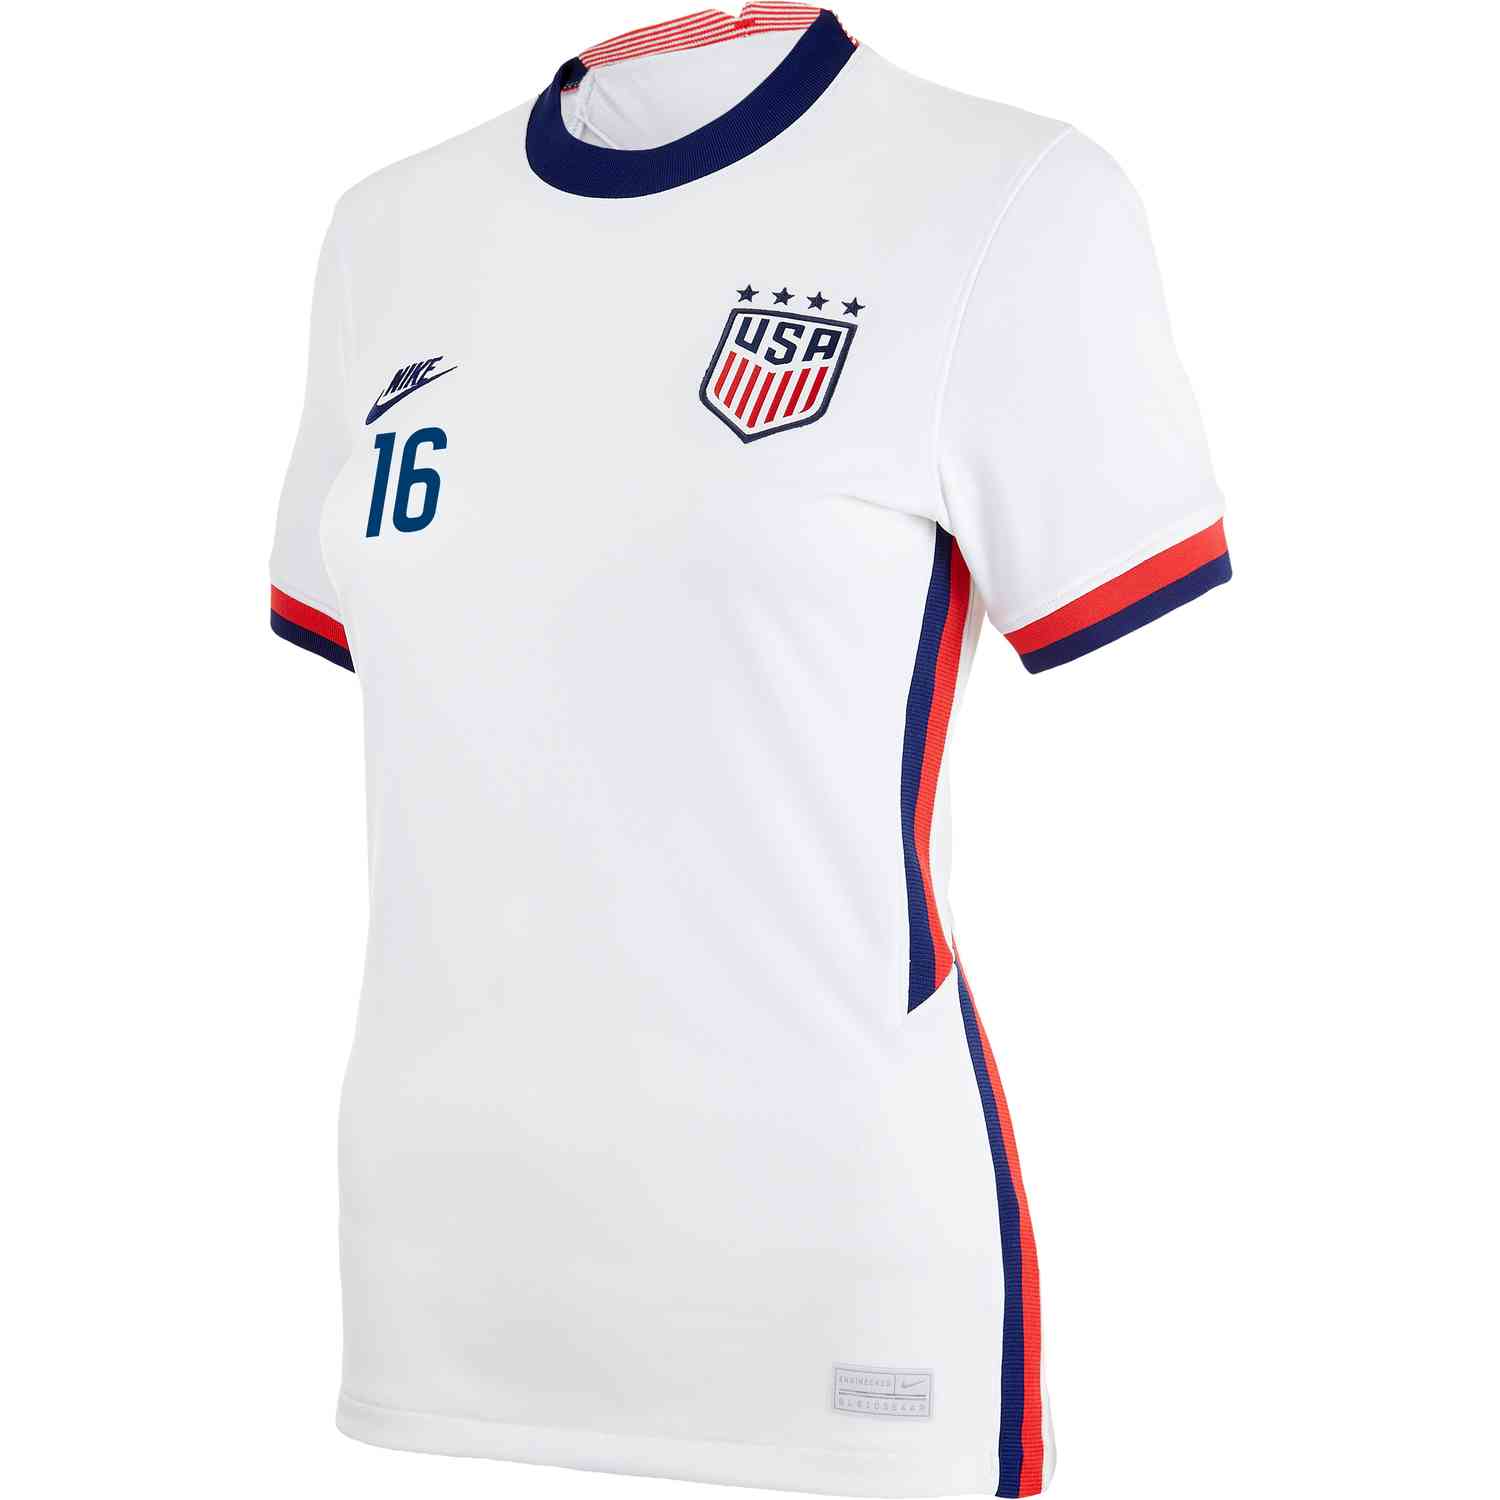 uswnt lavelle jersey